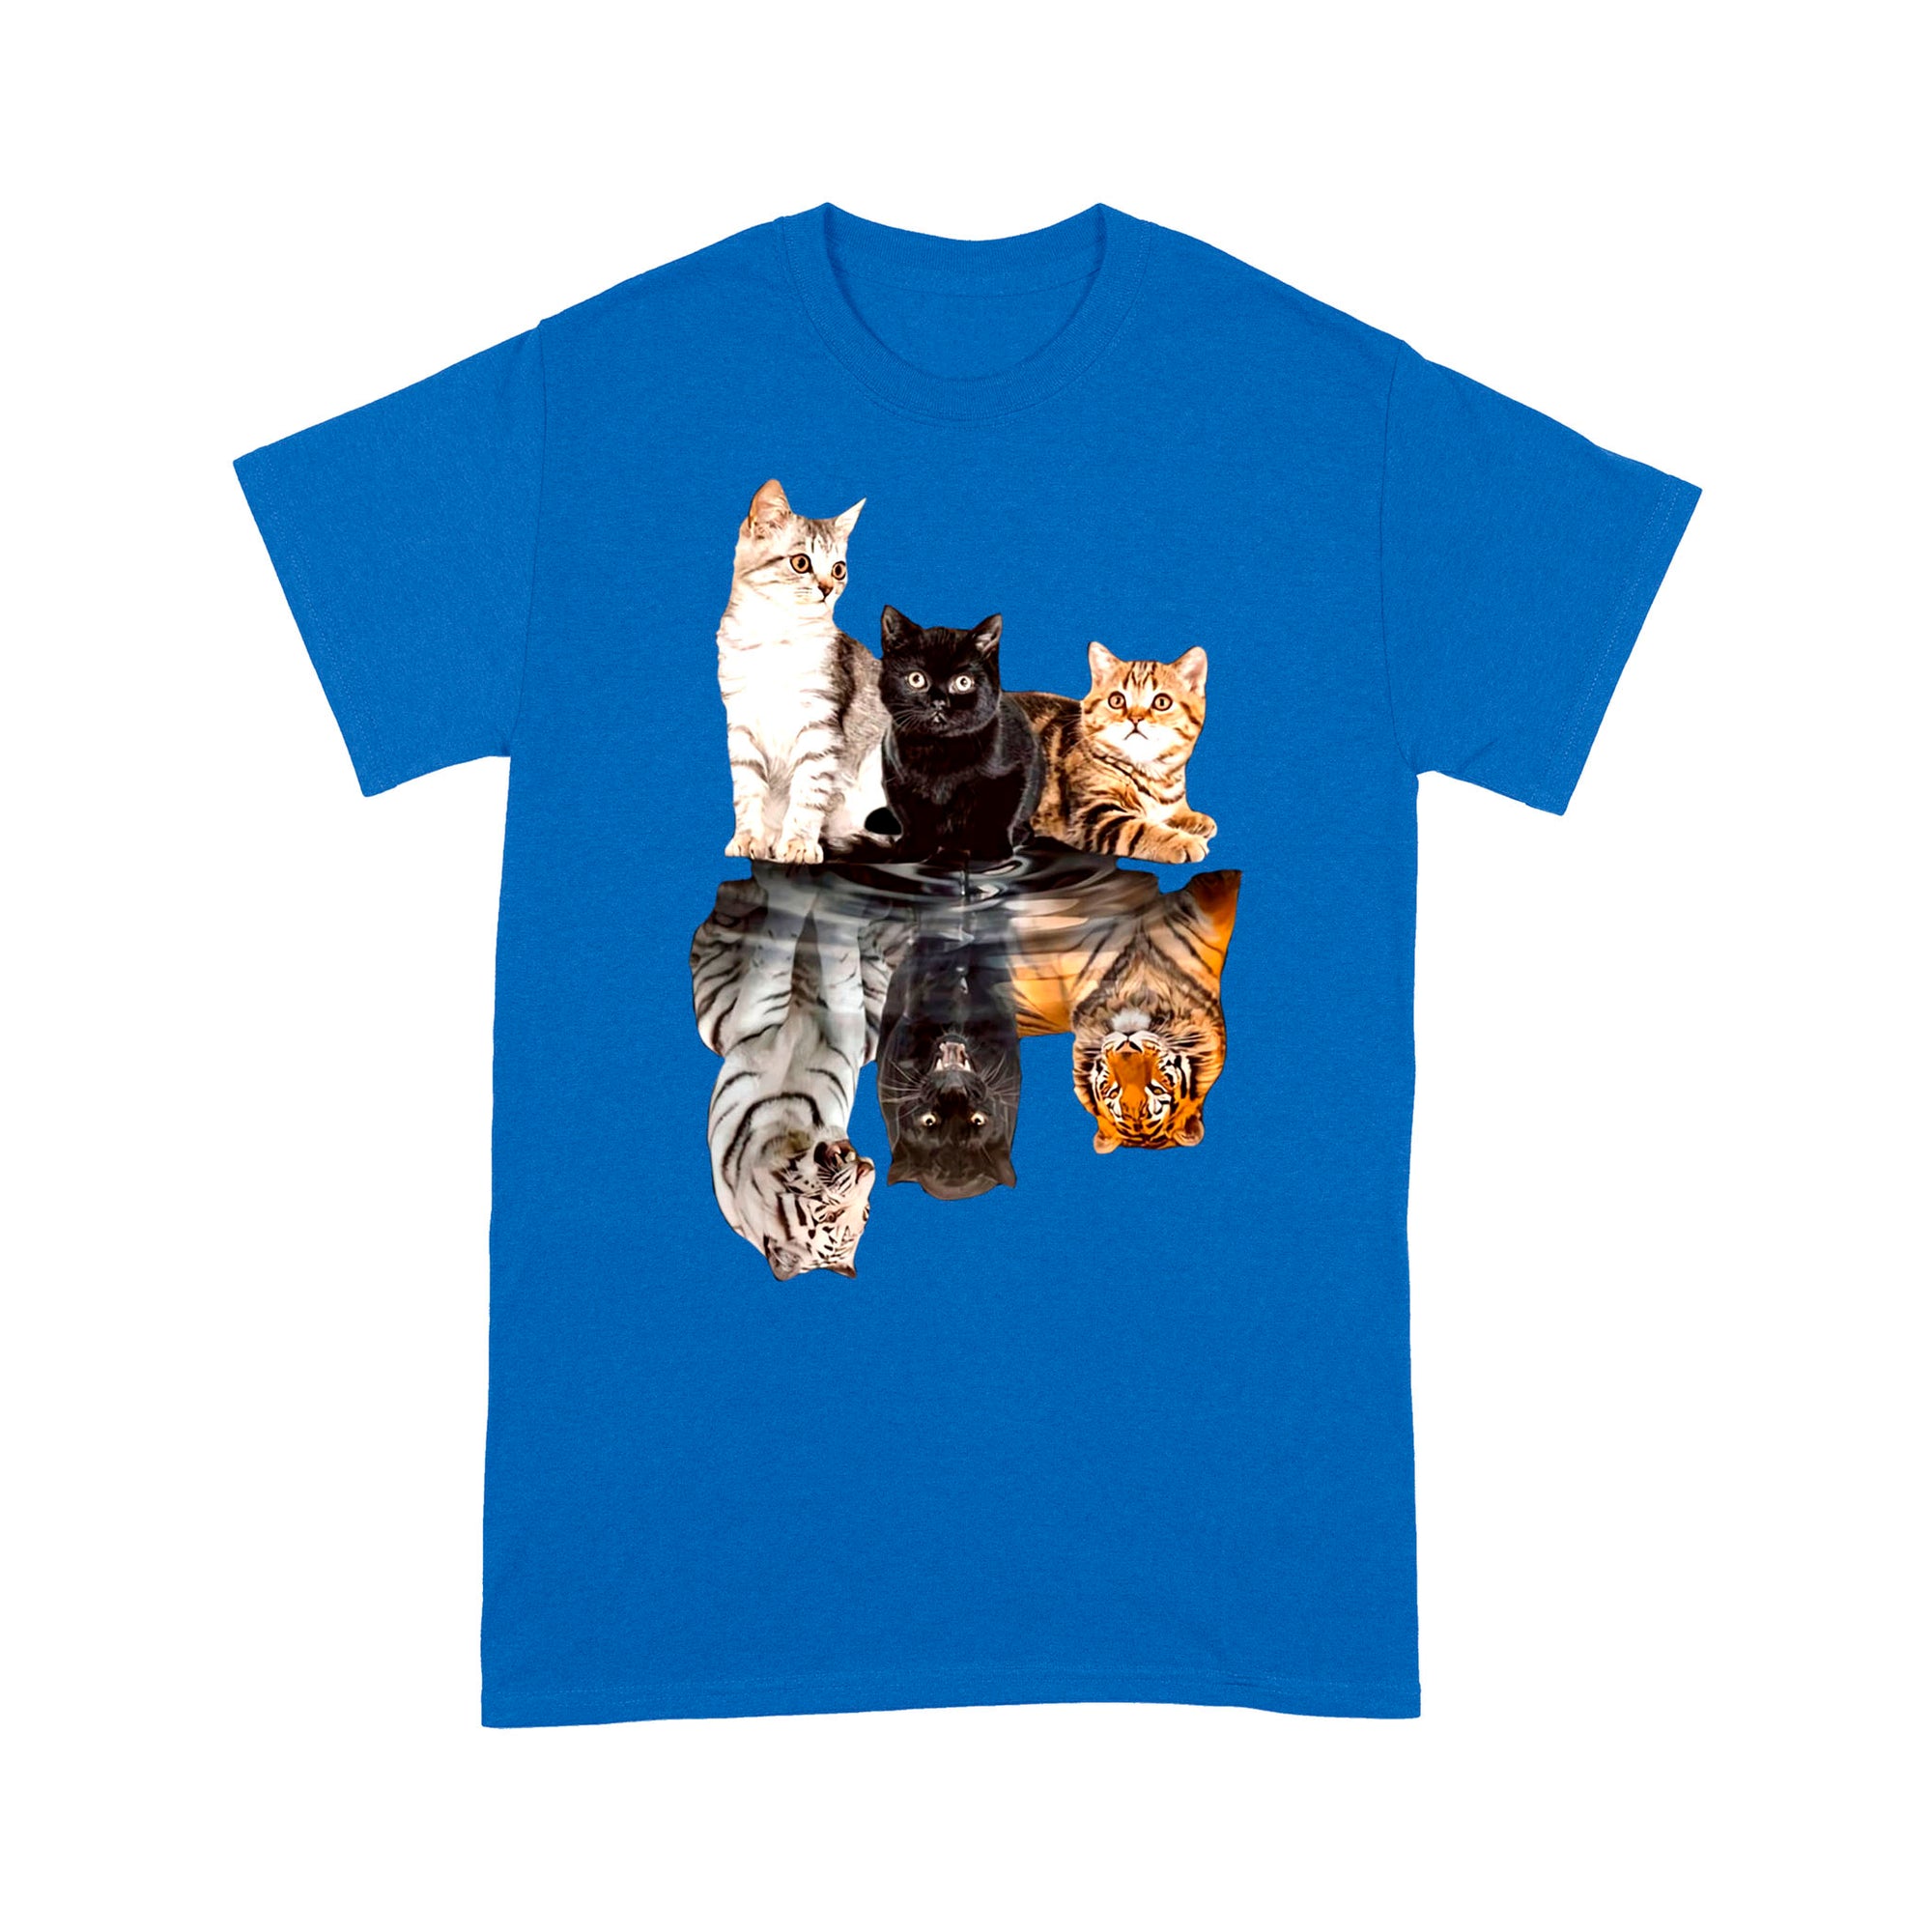 Premium T-shirt - The Cats Water Mirror Reflection Tigers